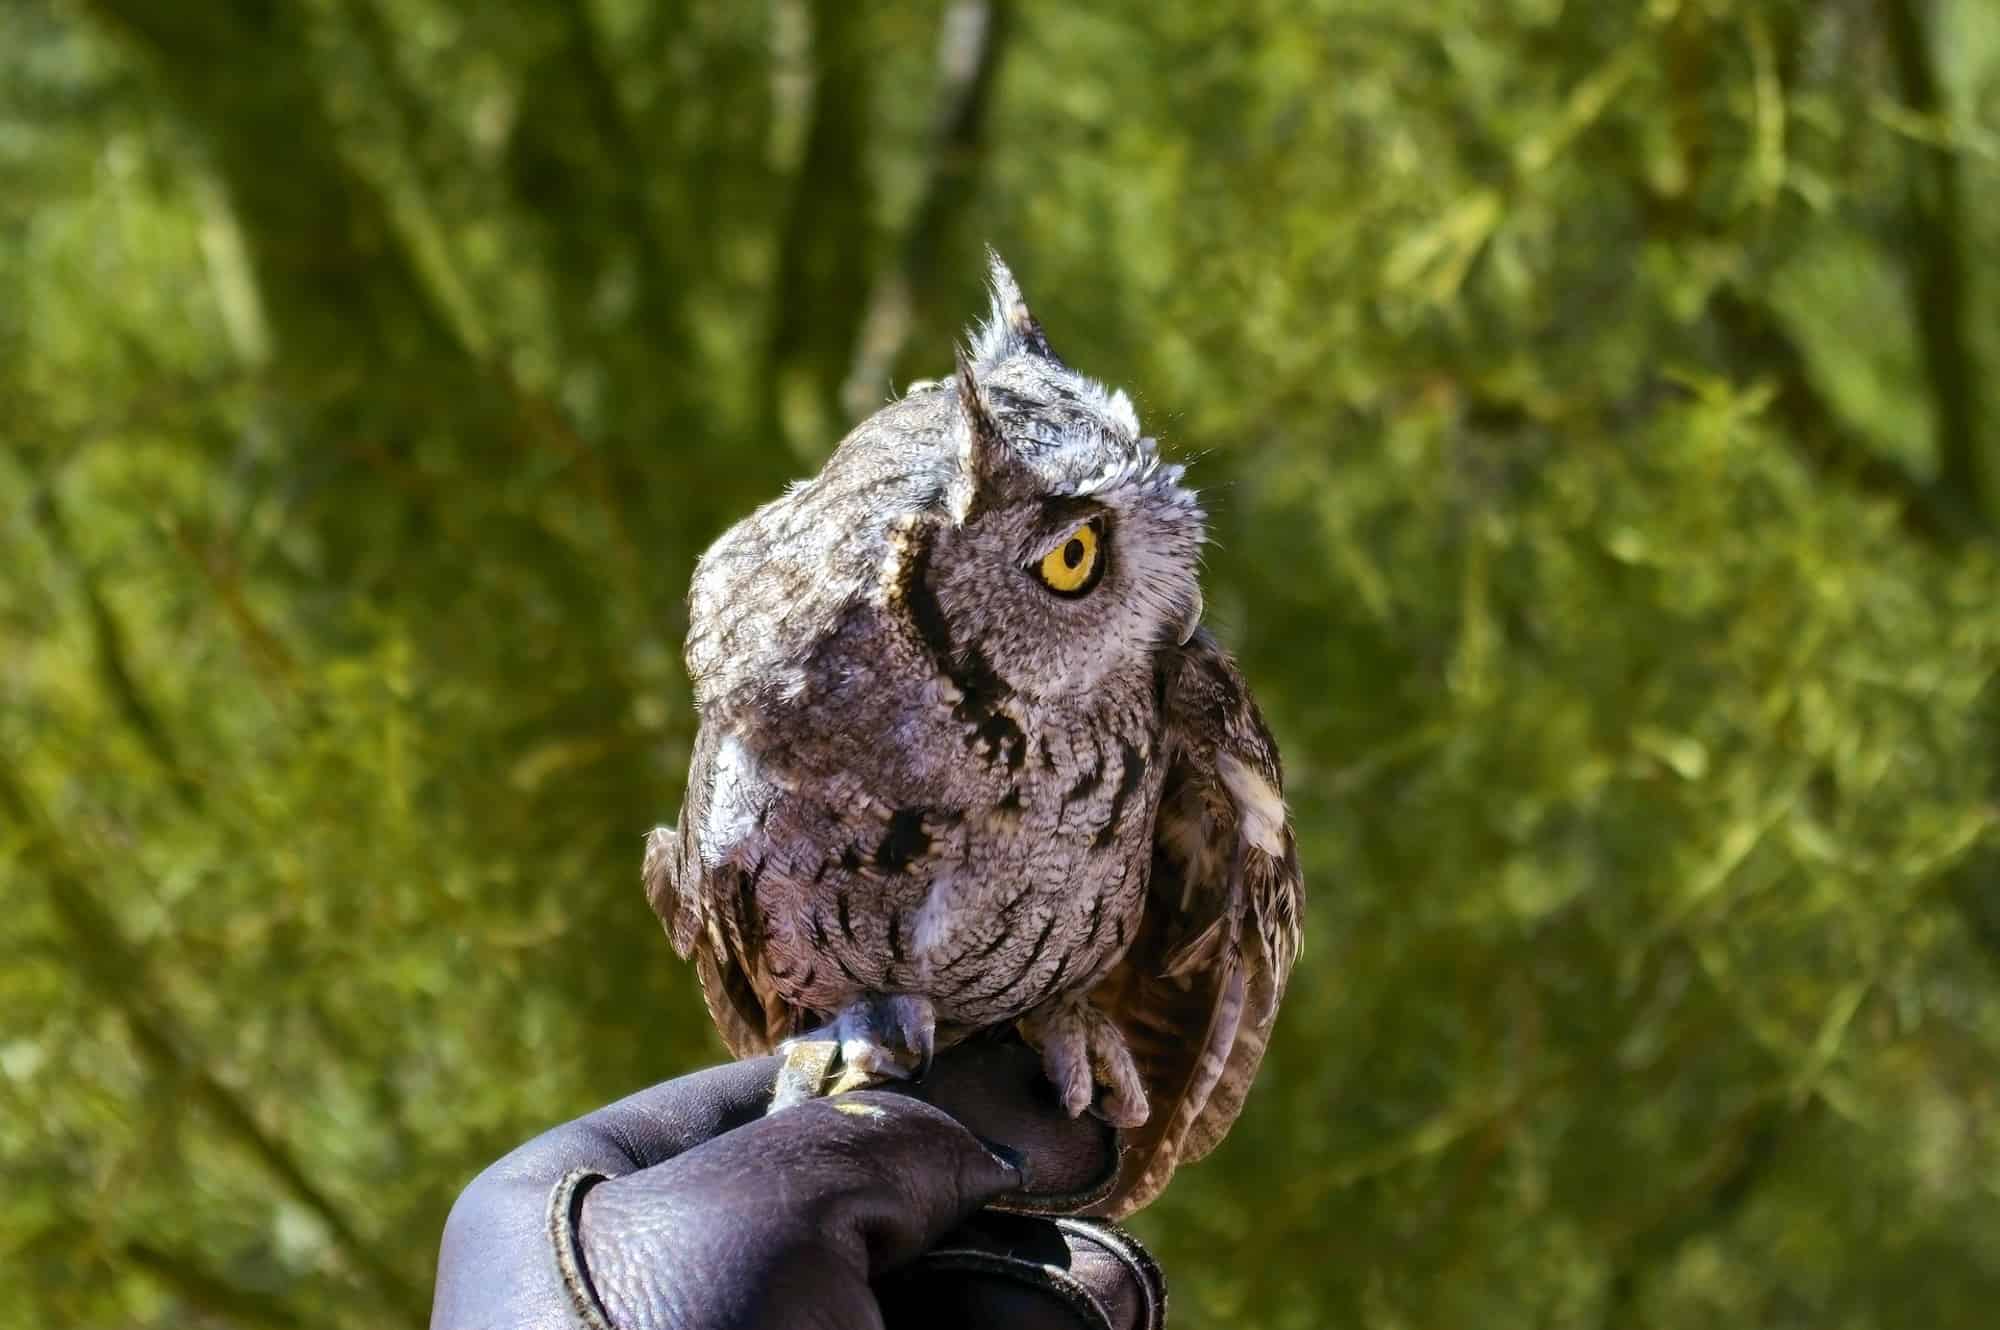 a small owl is sitting on a hand during a raptor presentation at the arizona sonora desert museum, the museum is a highlight when traveling from phoenix to tombstone